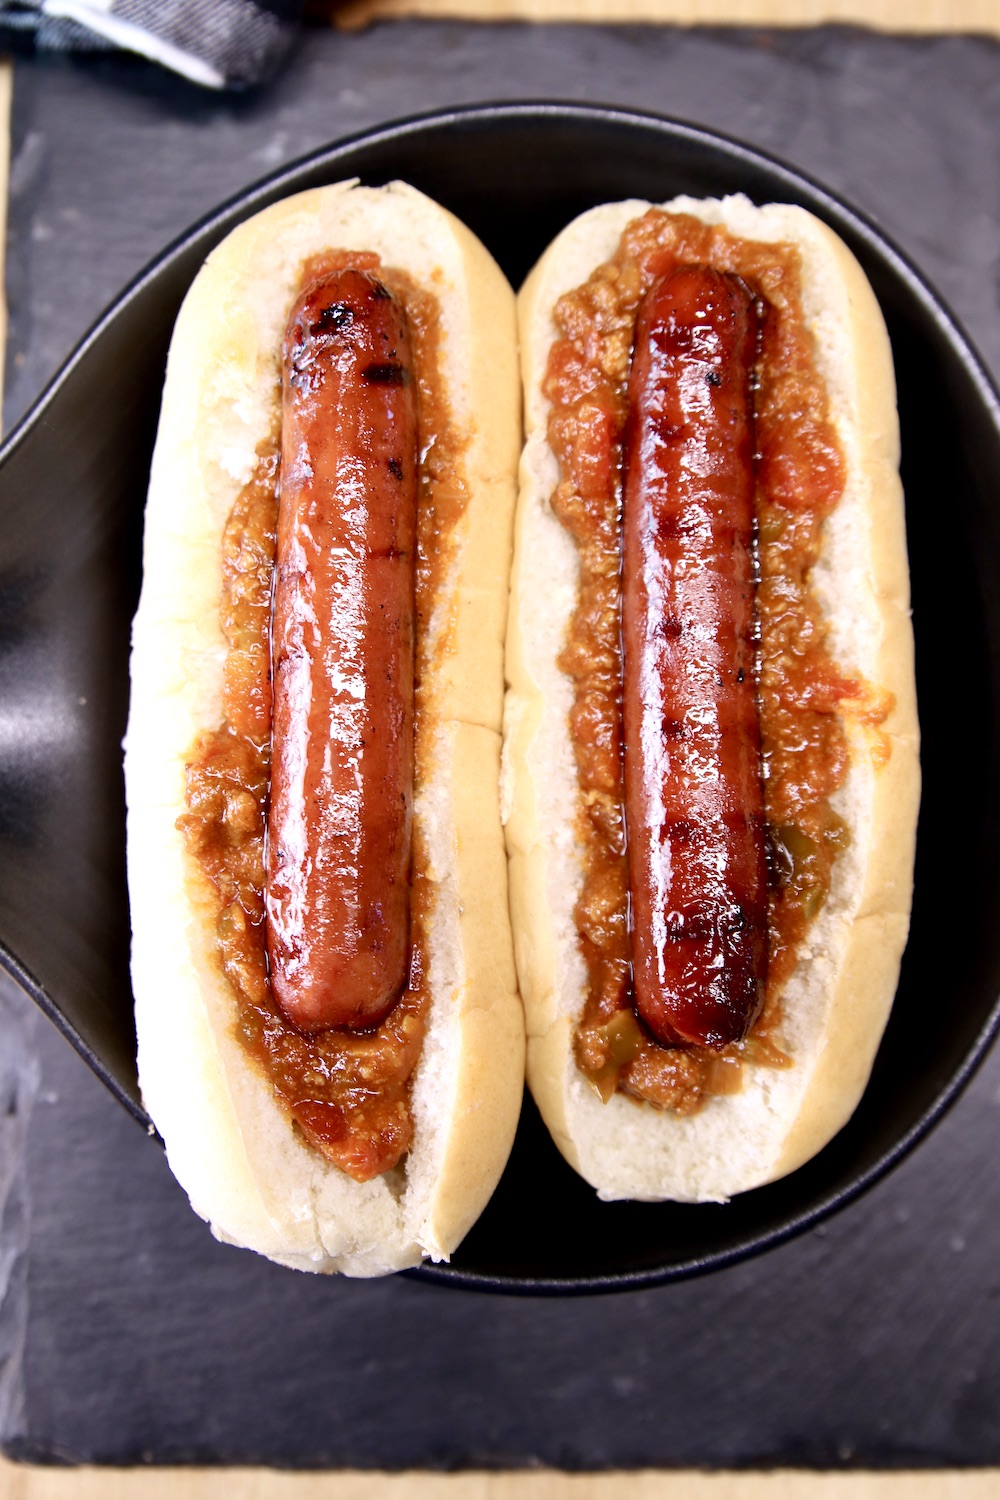 2 hoagie buns with chili and hot dogs